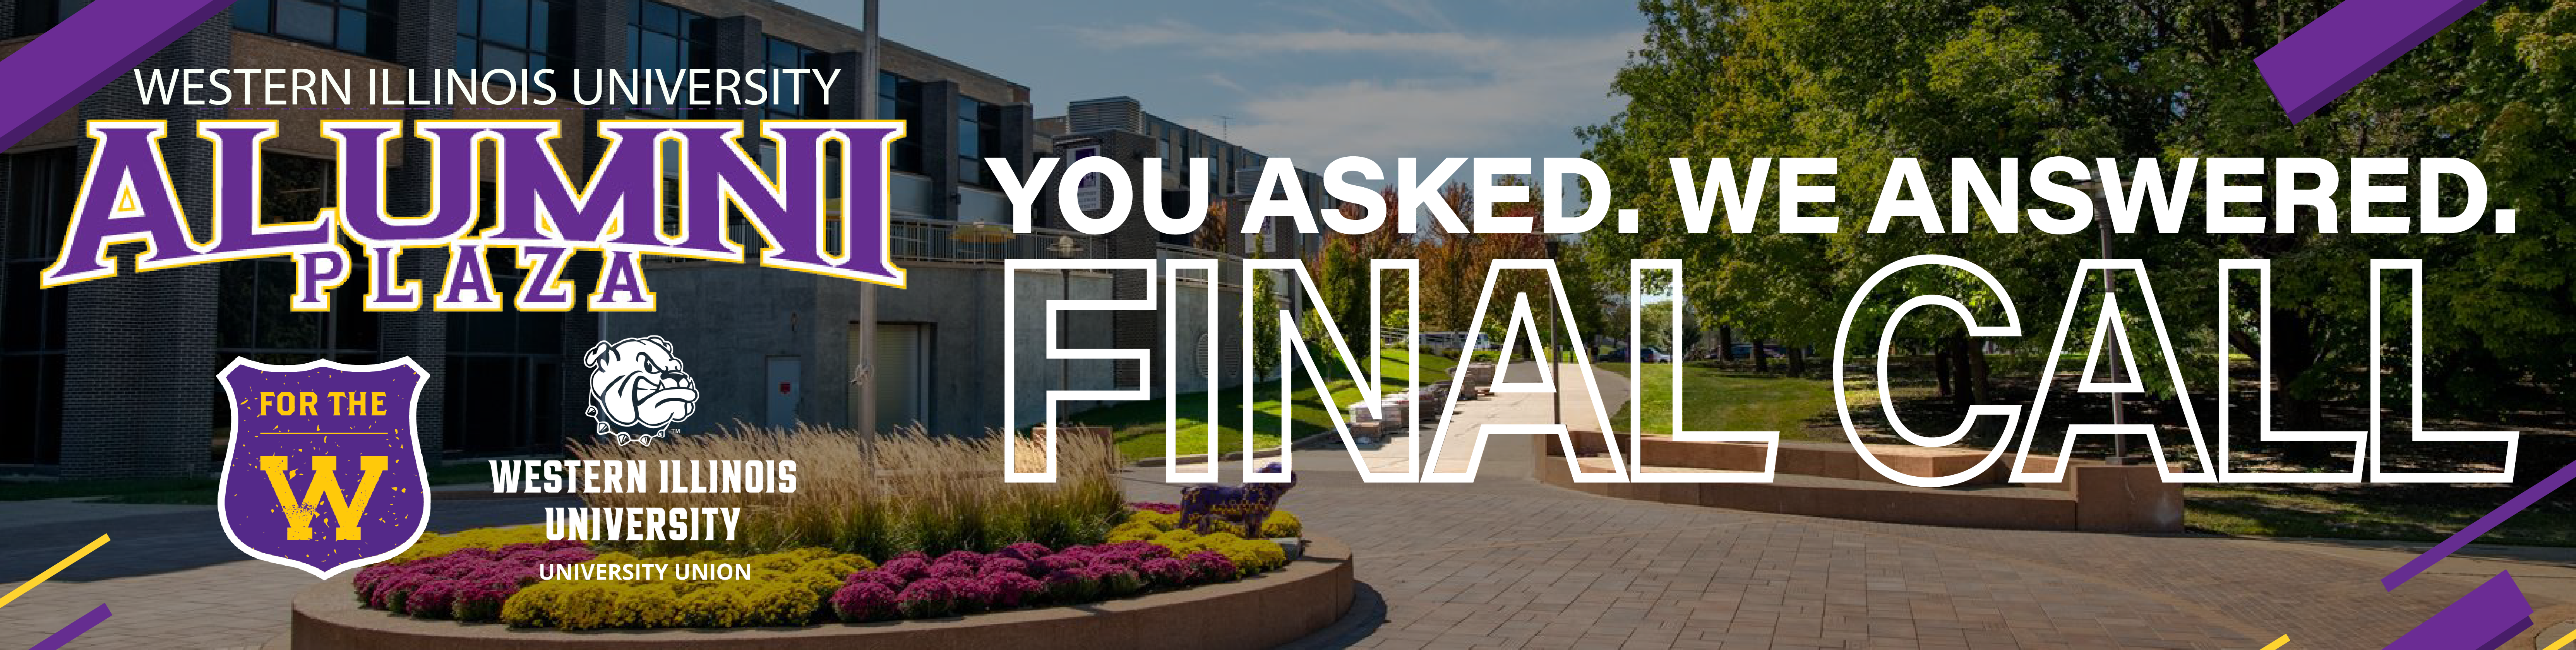 Photo of the WIU Alumni Plaza with the text You Asked. We Answered. Final Call